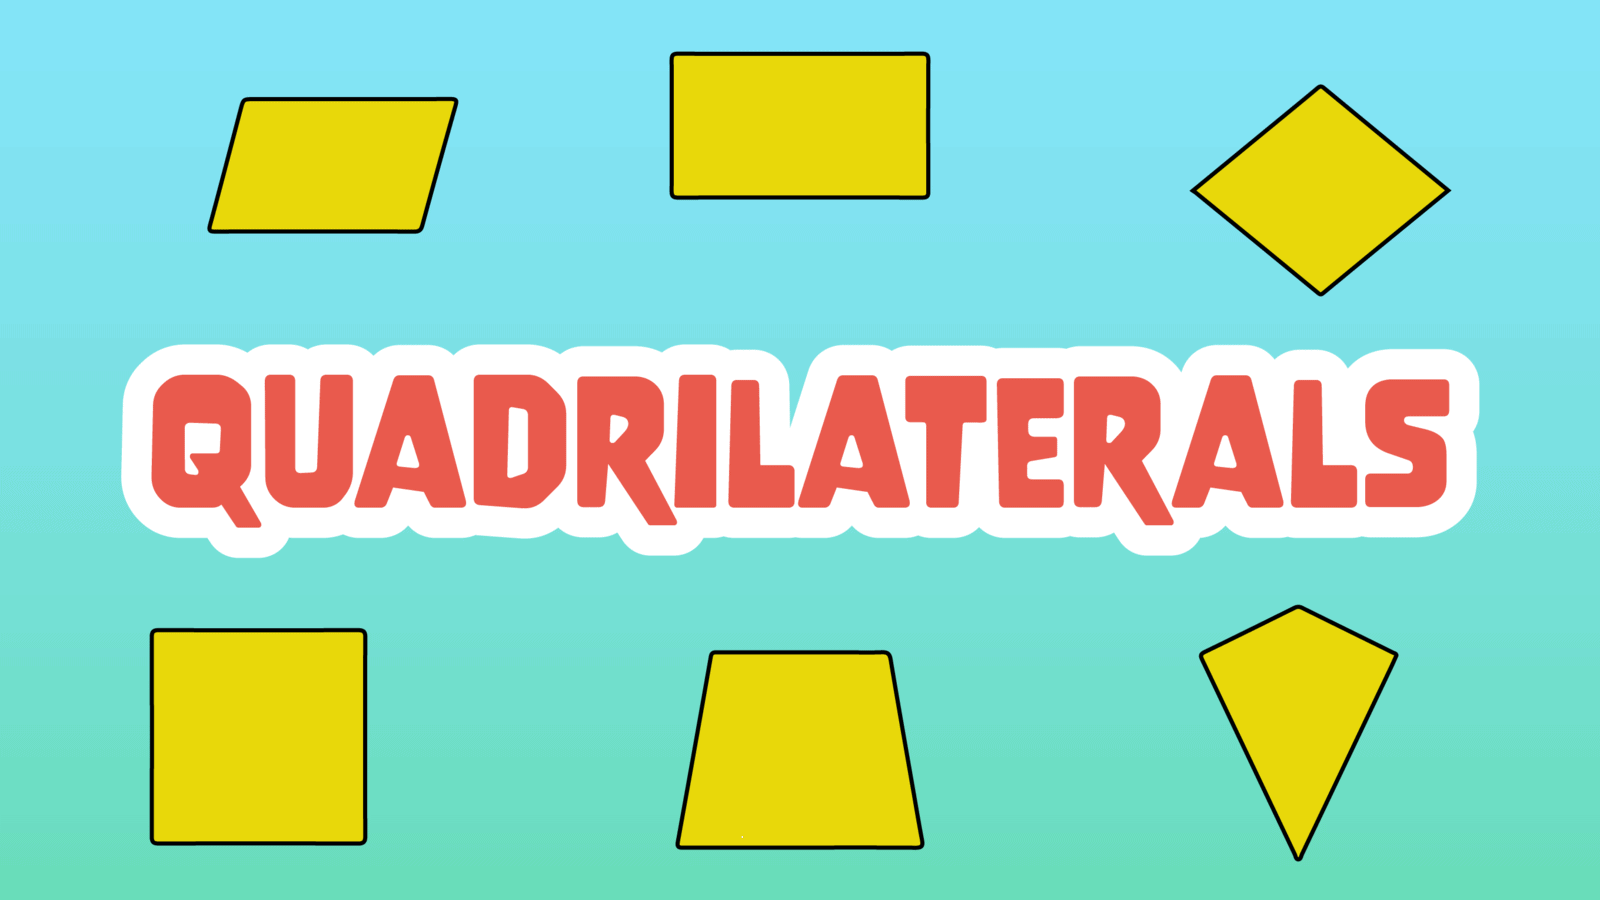 Quadrilaterals Facts for Kids – 5 Cool Facts about Quadrilaterals